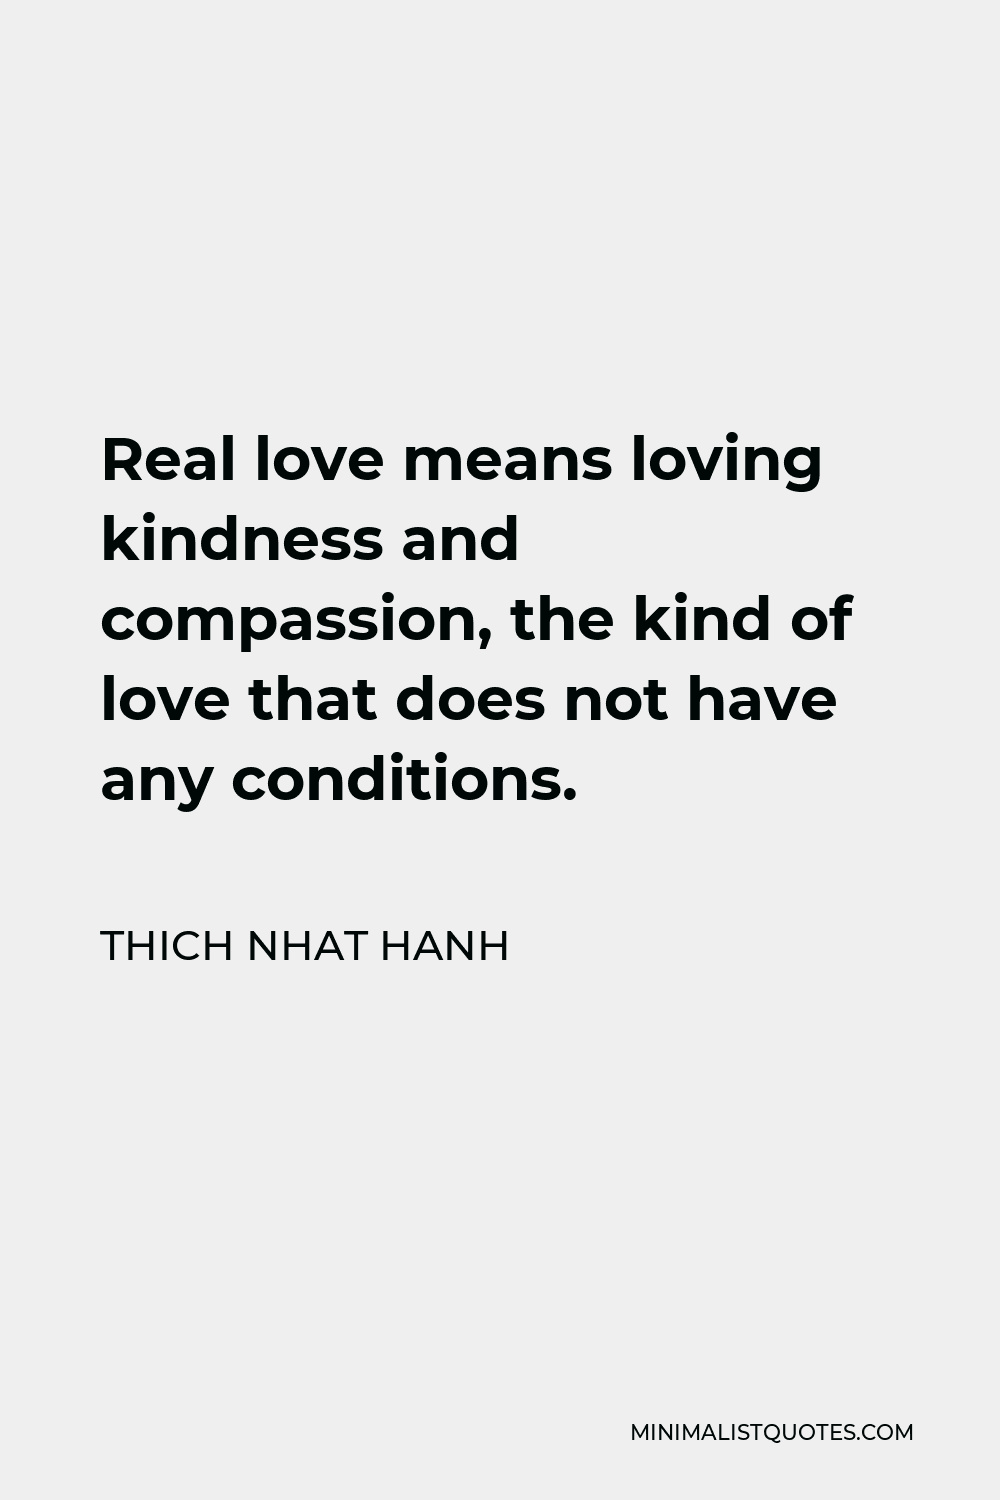 Thich Nhat Hanh Quote - Real love means loving kindness and compassion, the kind of love that does not have any conditions.